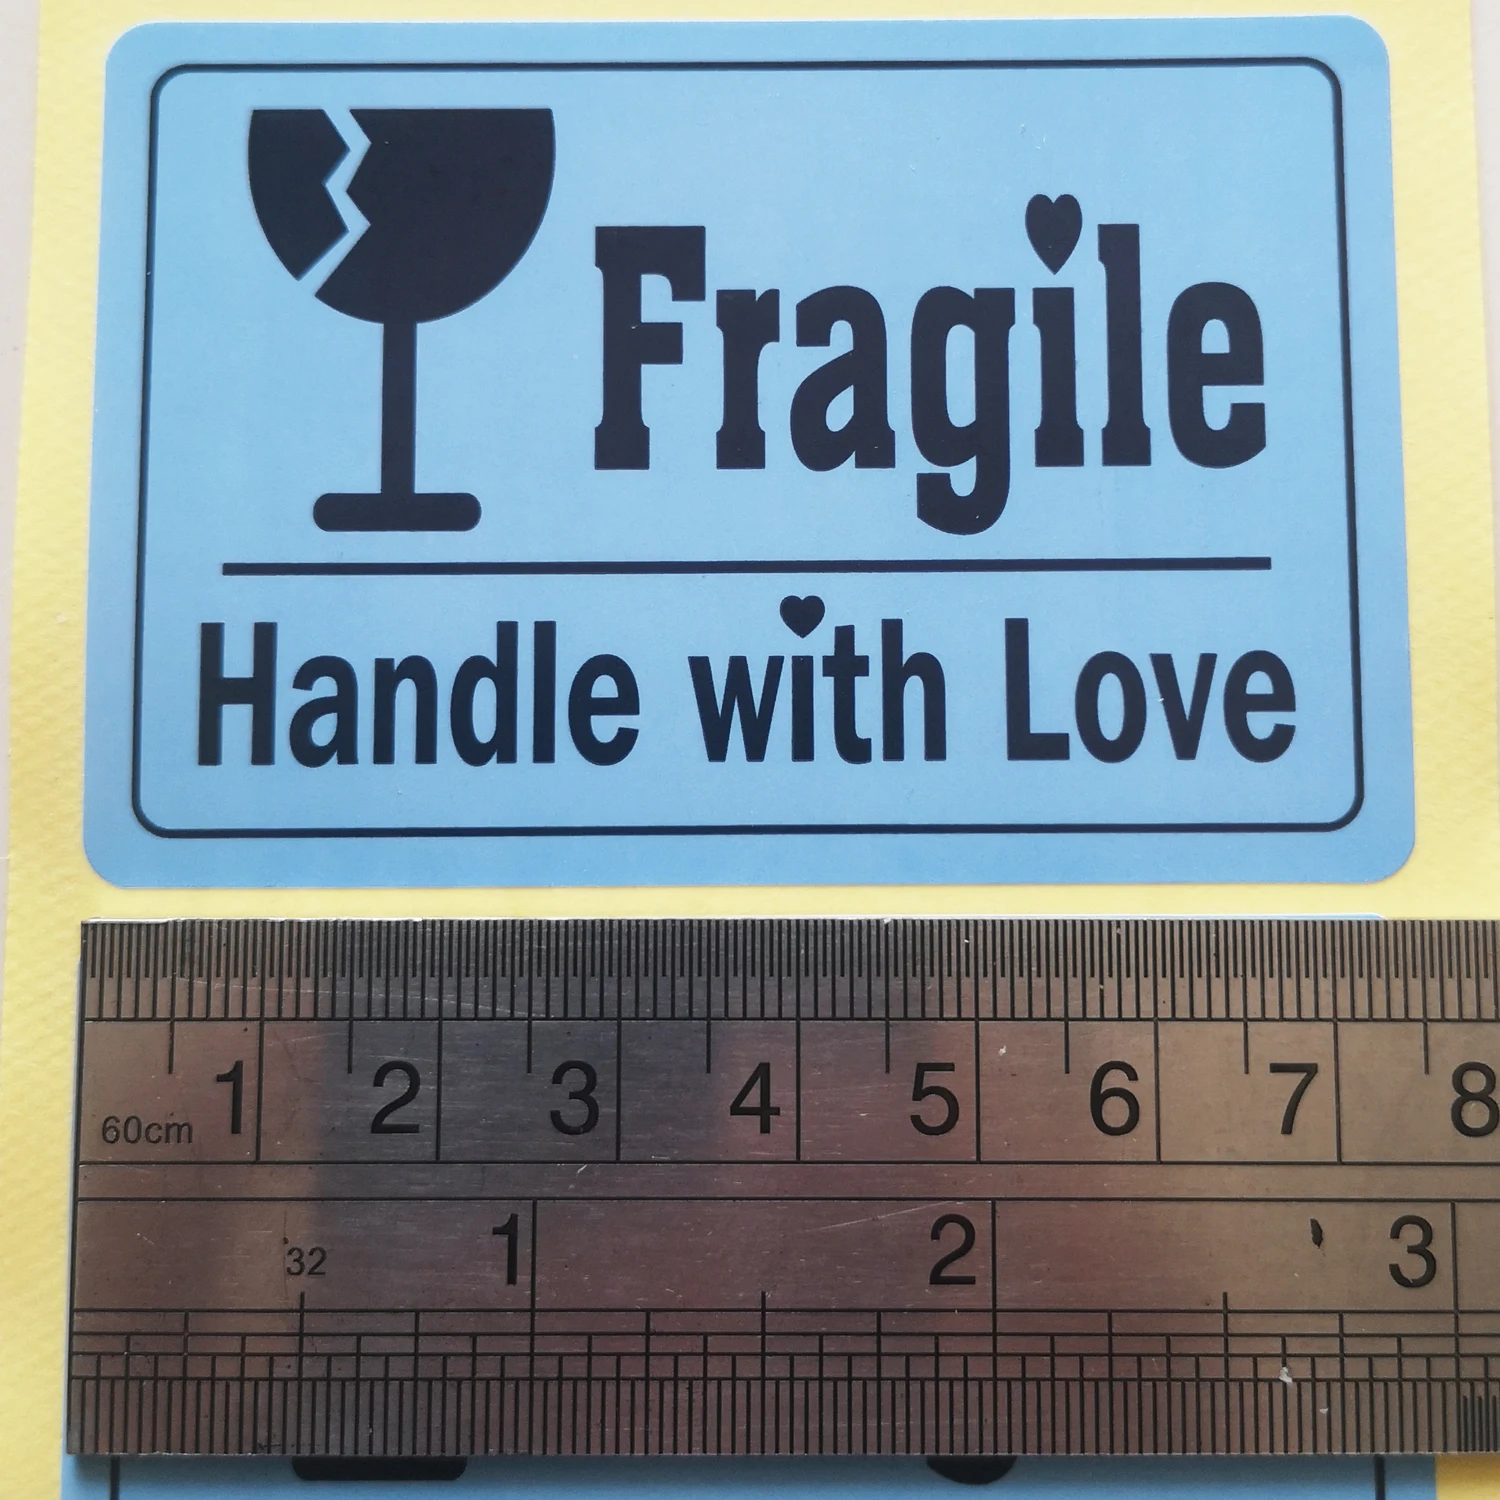 2000pcs 76x51mm GLASS FRAGILE HANDLE WITH LOVE Shipping Label Sticker, Item No. SS37